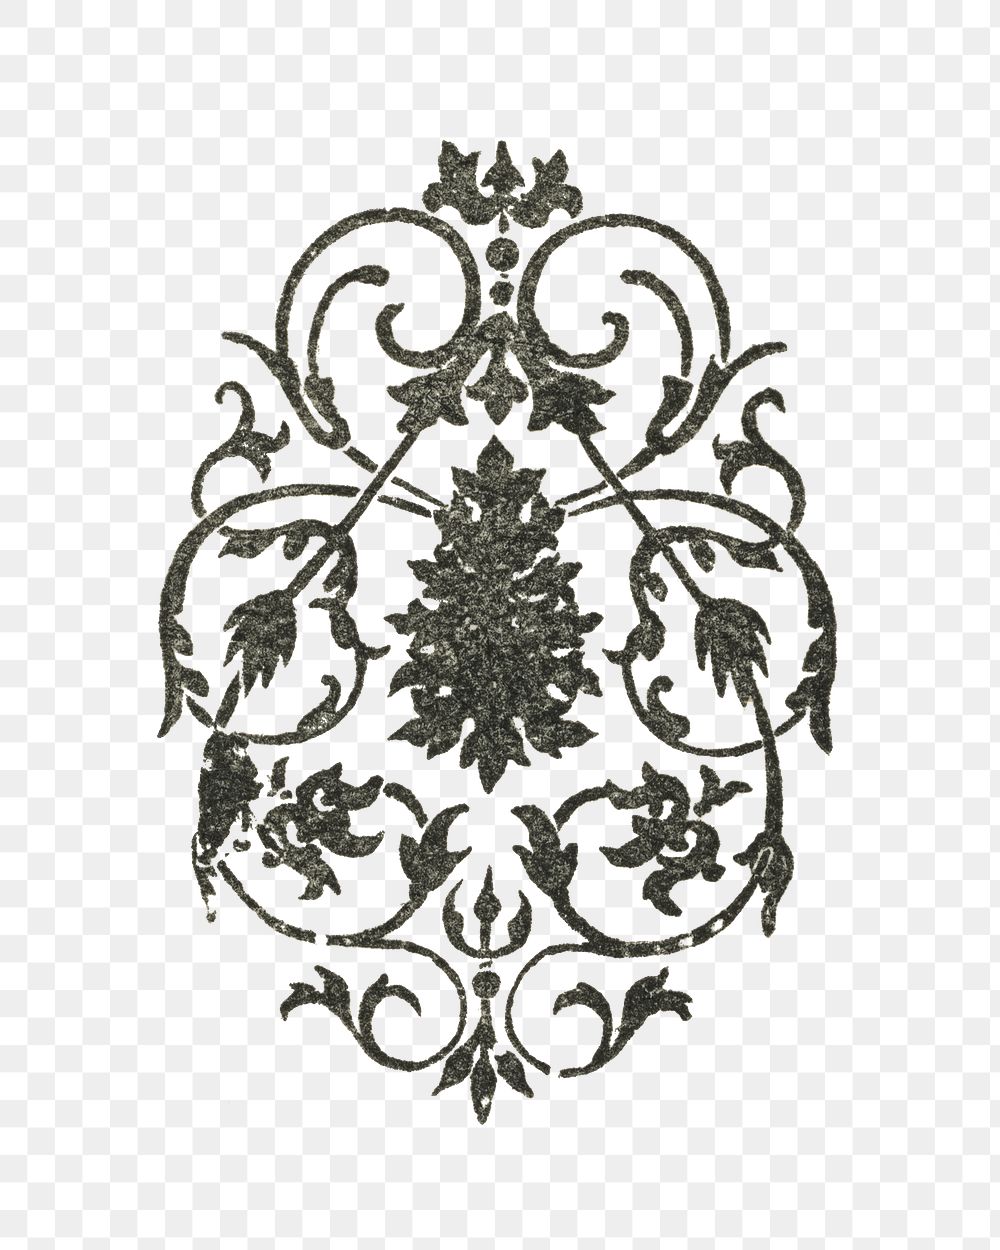 Gothic ornament png, transparent background